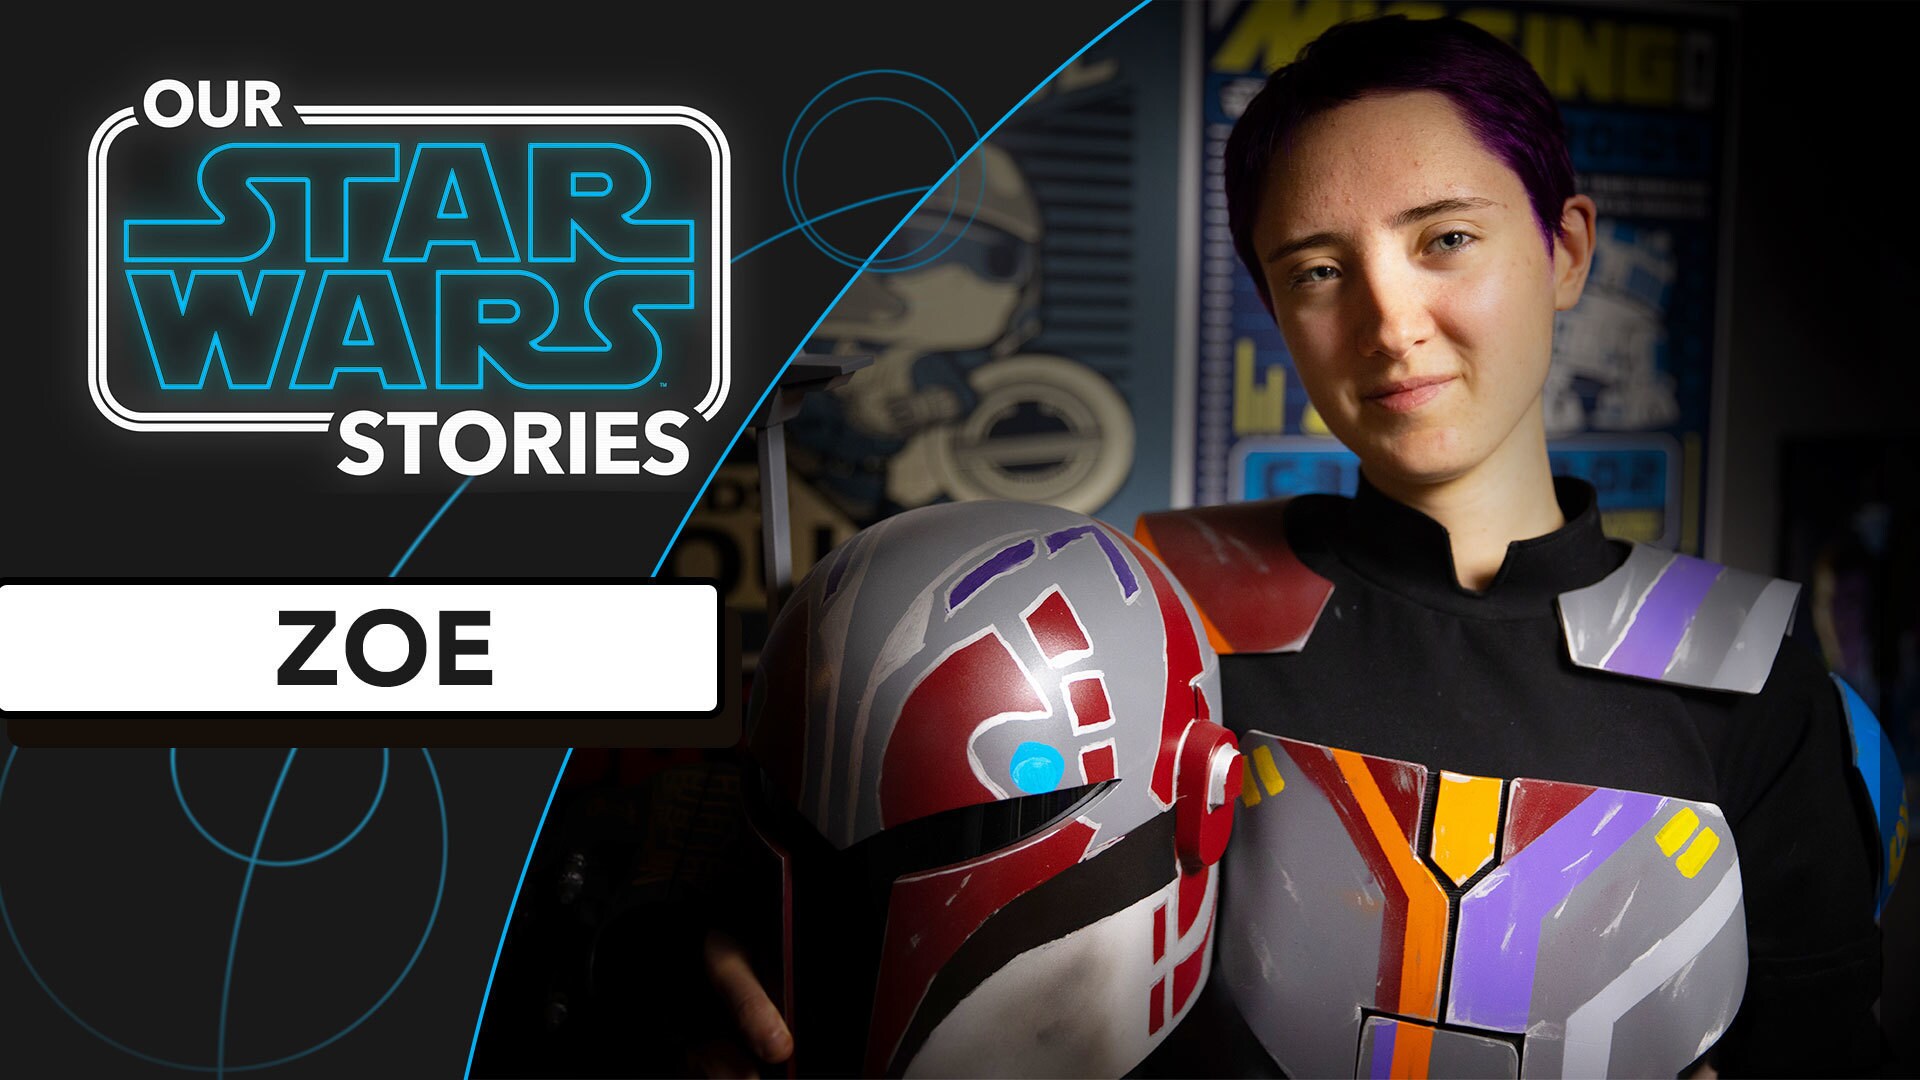 Zoe Hinton and the Creative Spark of Star Wars | Our Star Wars Stories